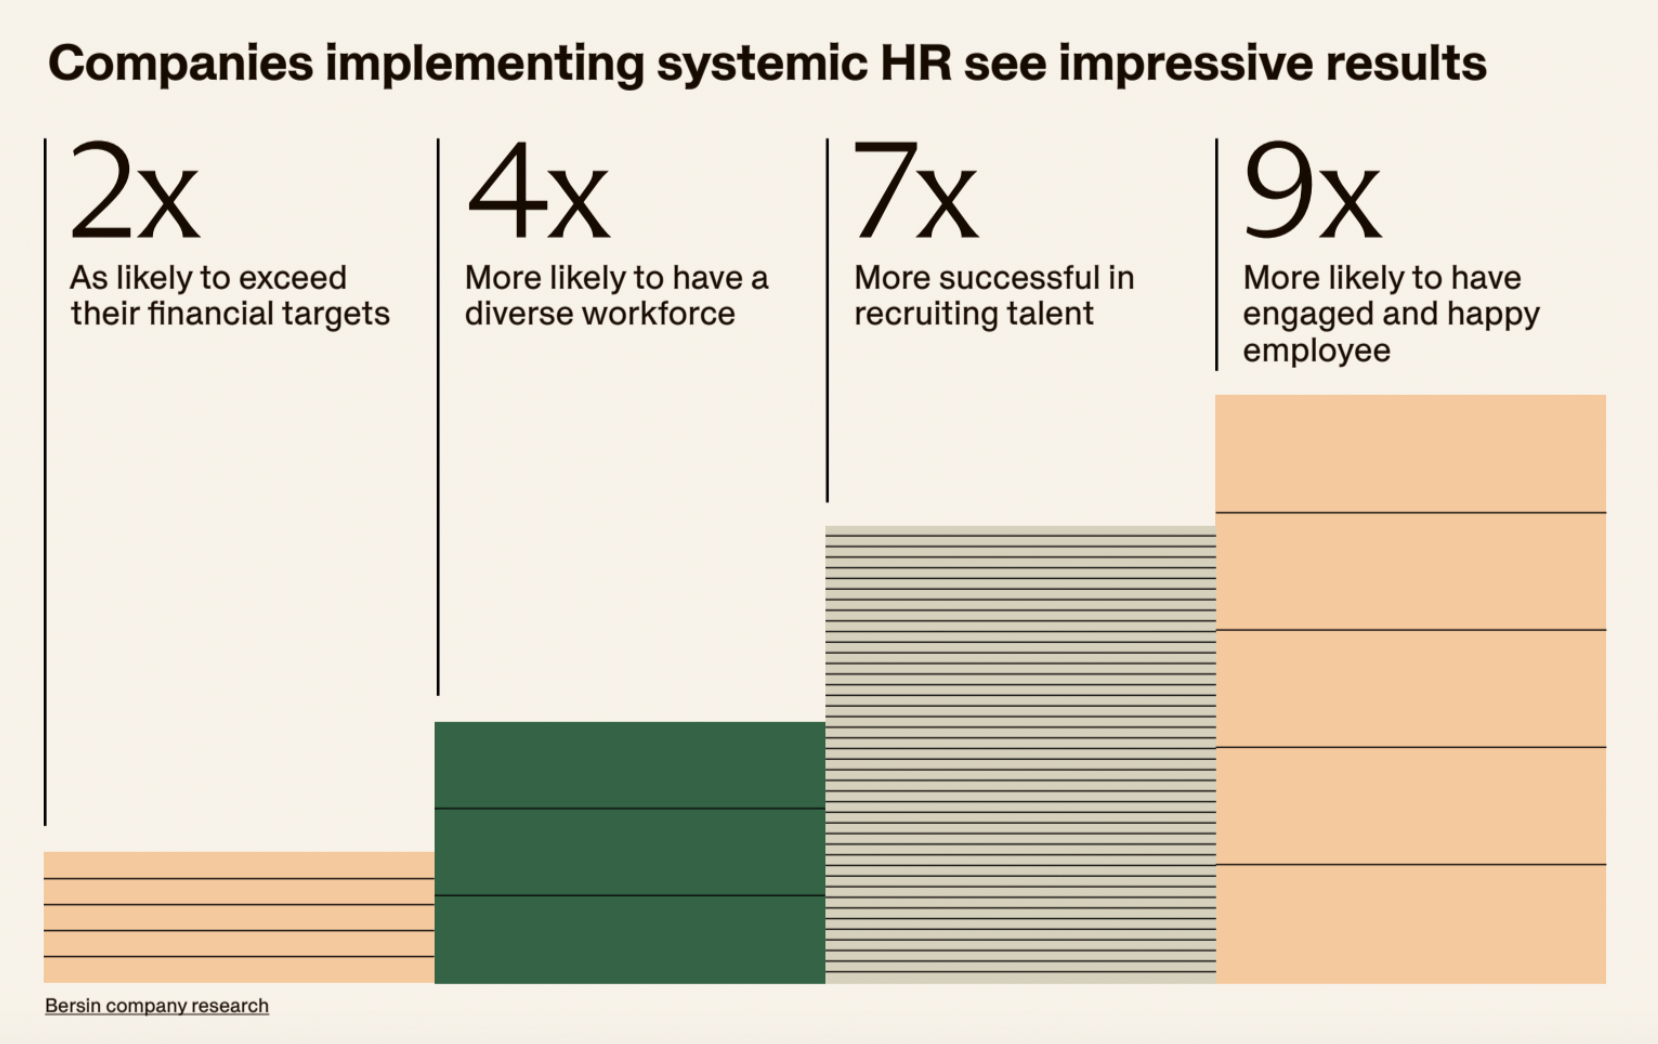 Companies implementing systemic HR see impressive results - 2x As likely to exceed their financial targets